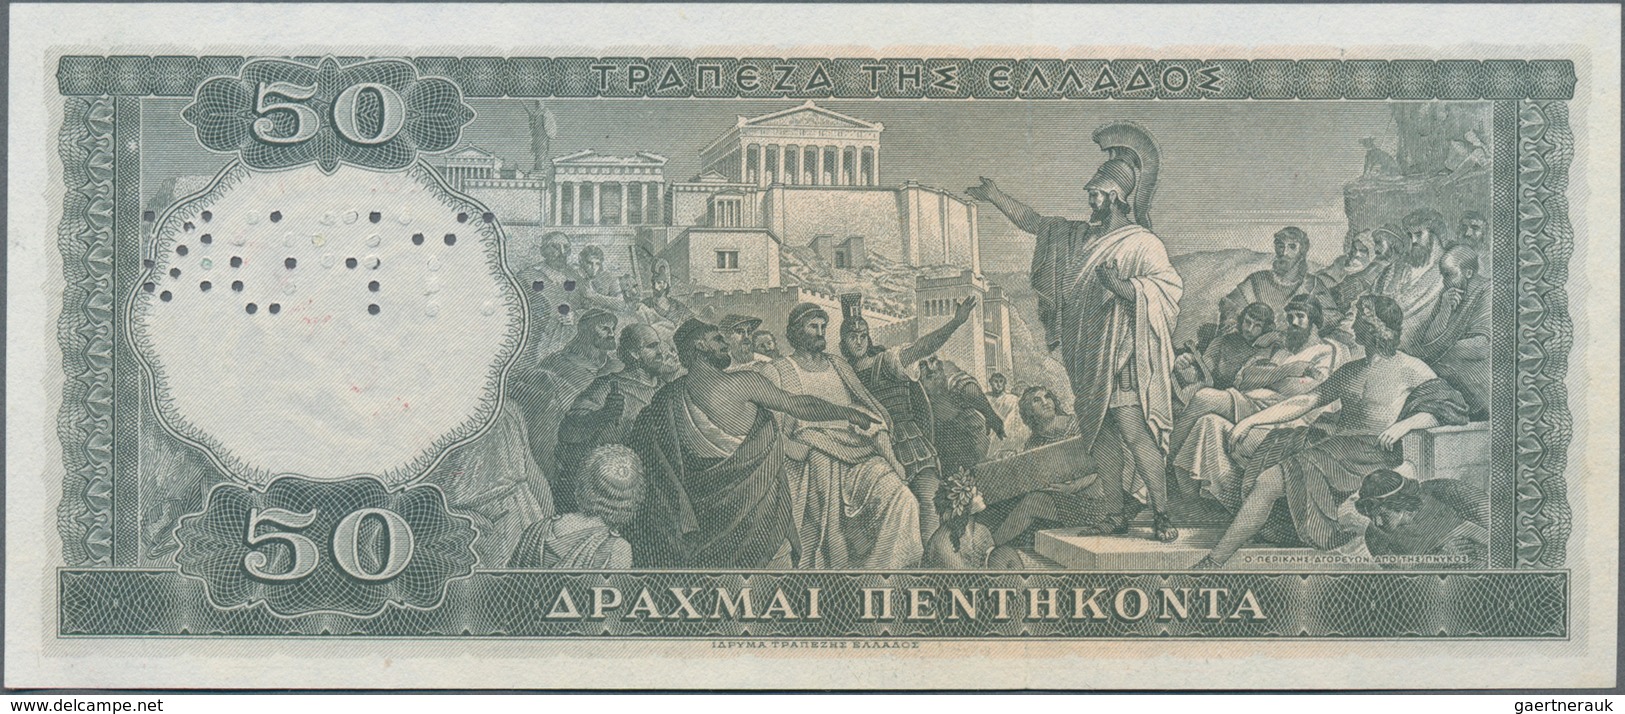 Greece / Griechenland: 50 Drachmai 1955 SPECIMEN, P.191s, Serial Number 000000 With Red Overprint "S - Grecia